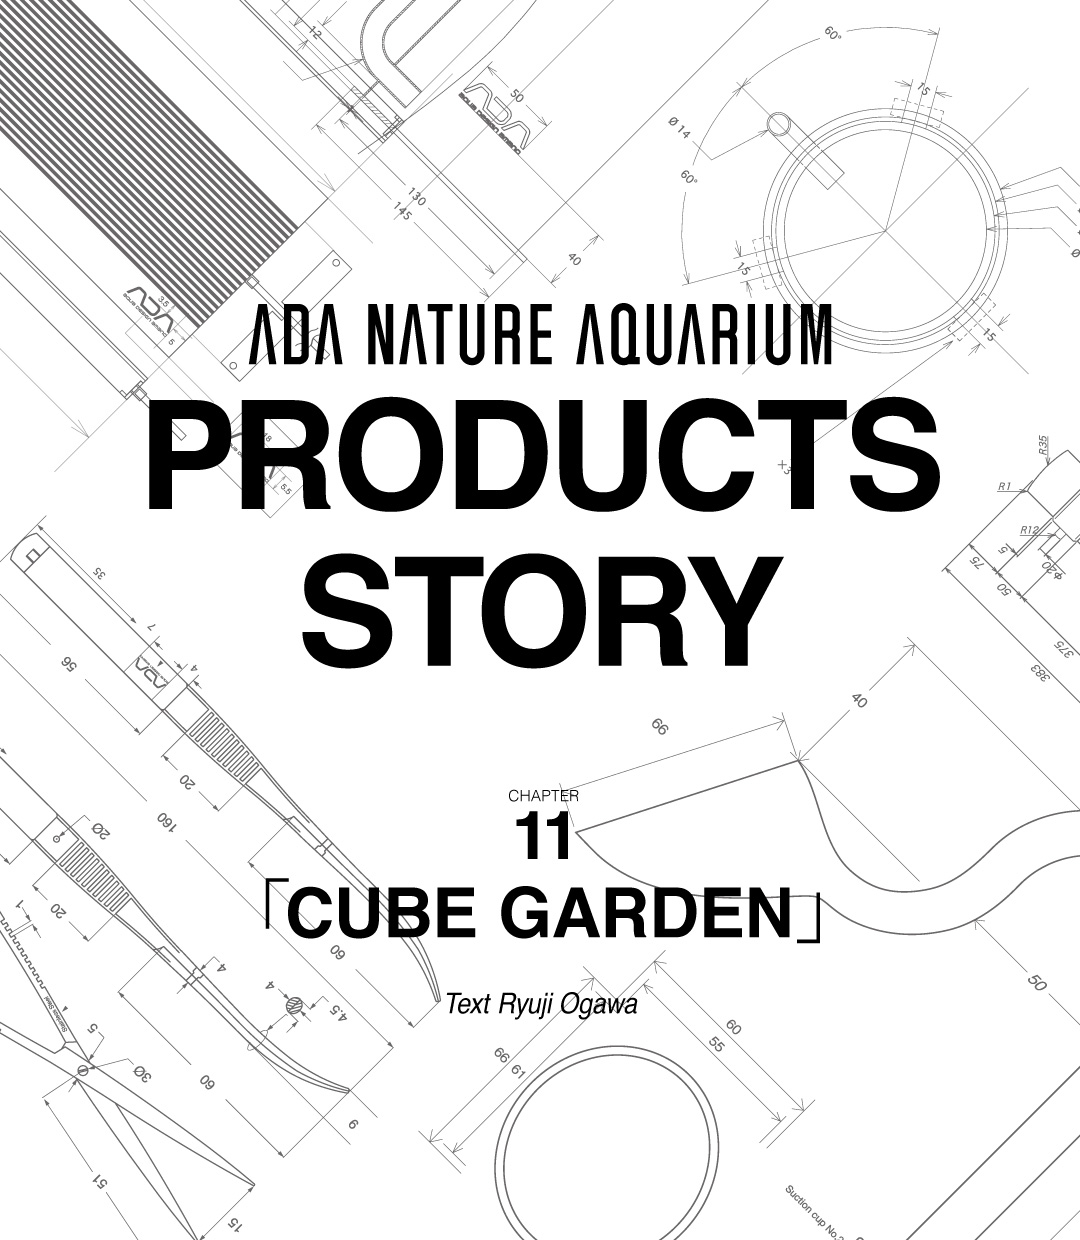 NA PRODUCTS STORY #11 CUBE GARDEN